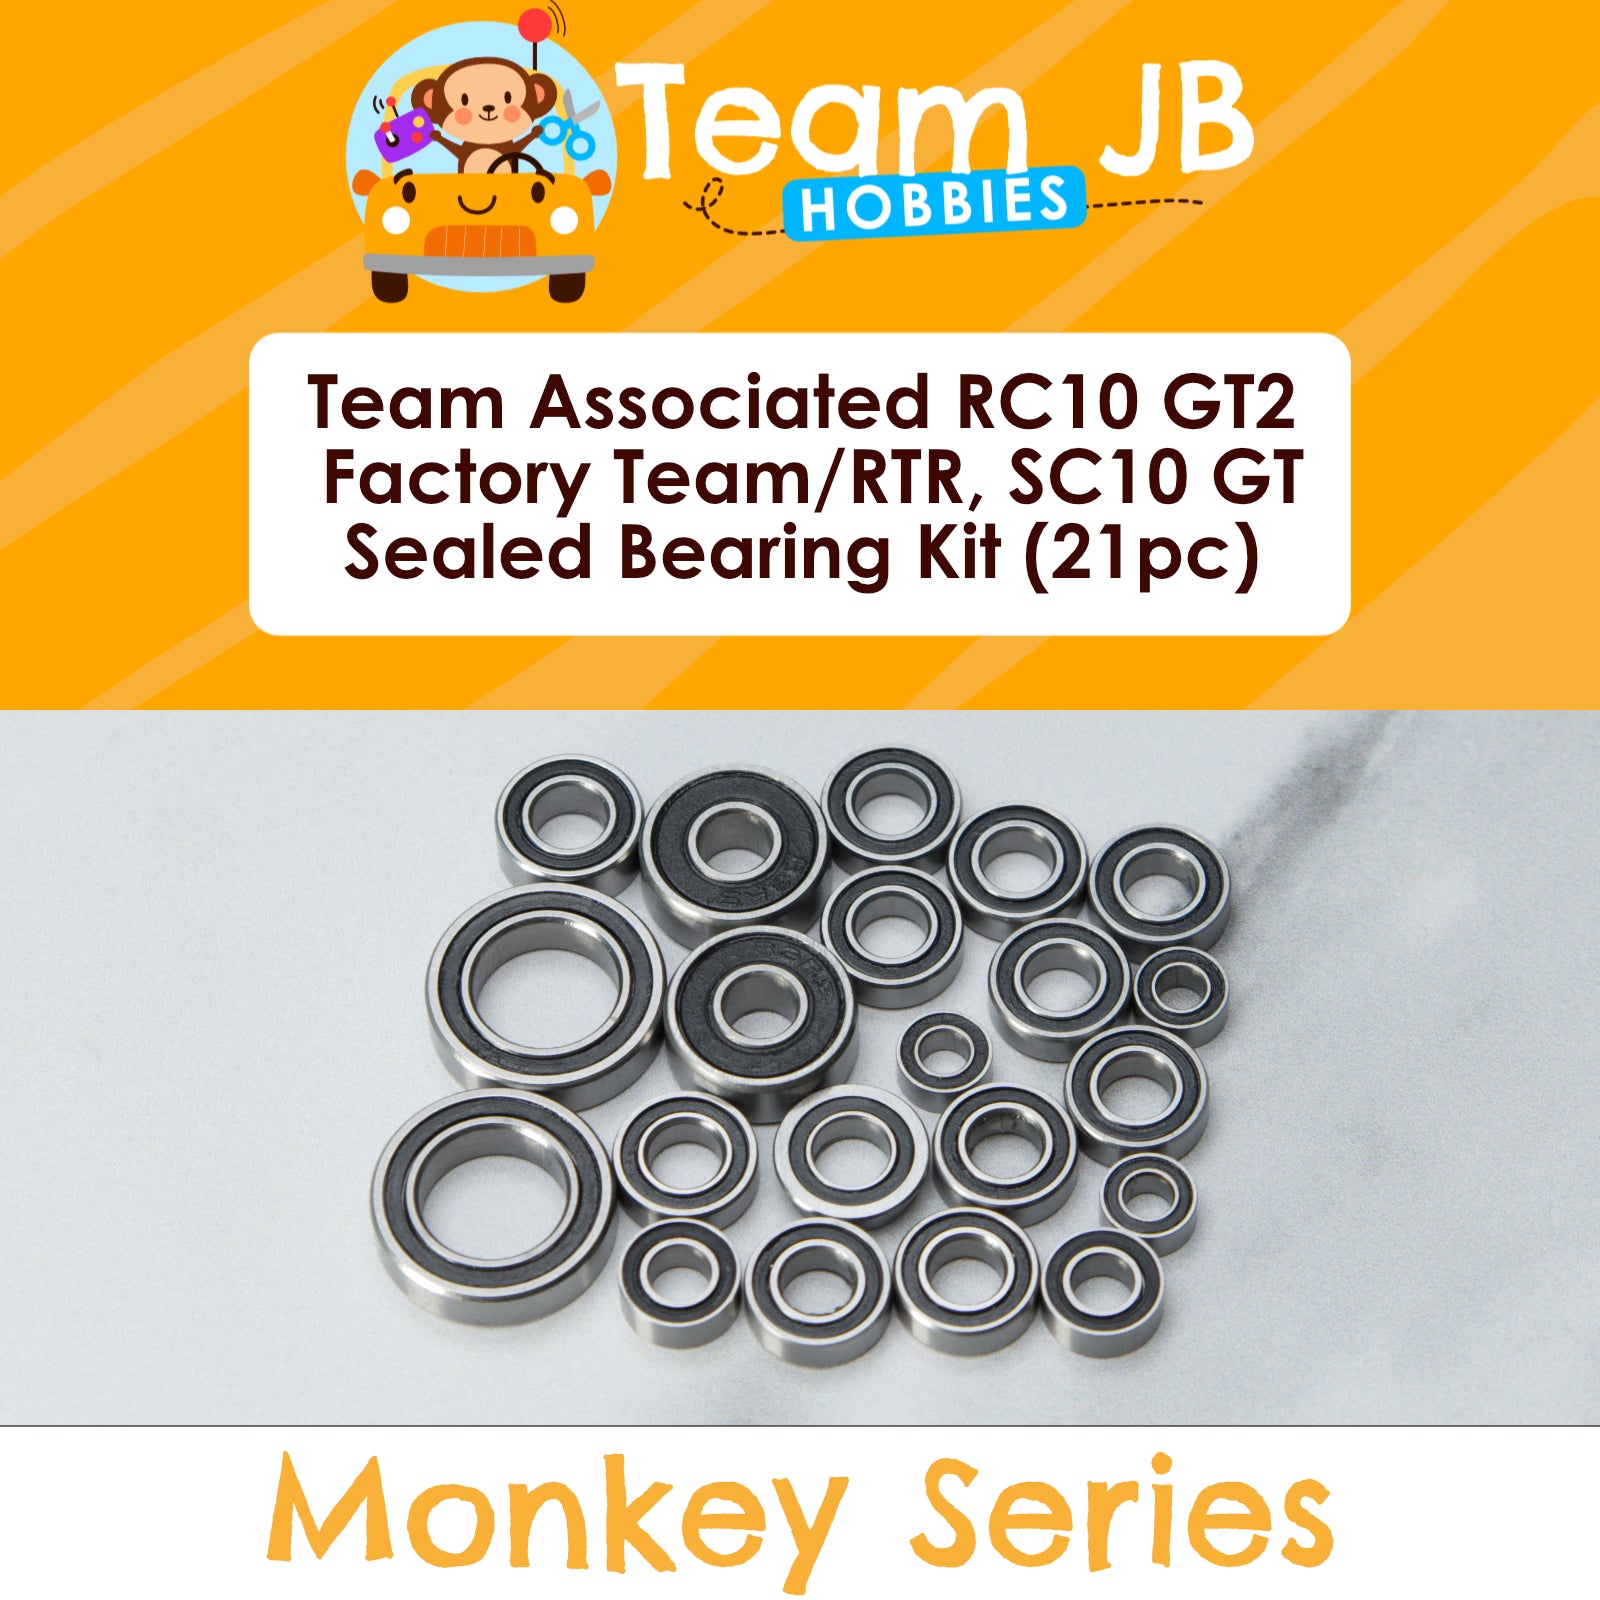 Team Associated RC10 GT2 Factory Team, RC10 GT2 RTR, SC10GT - Sealed Bearing Kit